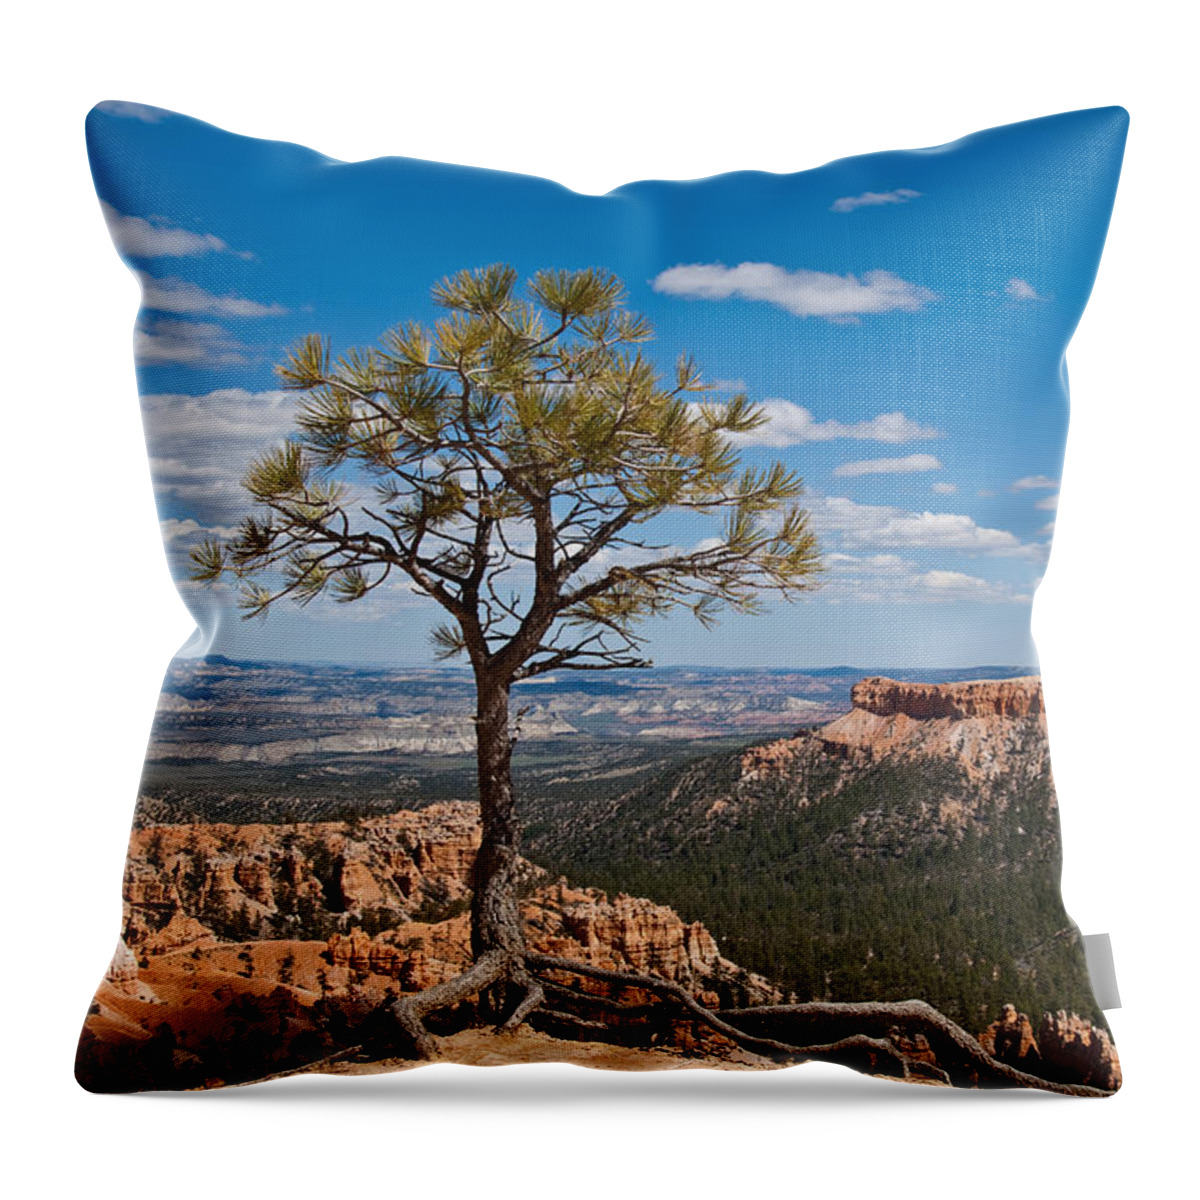 Beauty In Nature Throw Pillow featuring the photograph Ponderosa Pine Tree Clinging to Life on Canyon Rim by Jeff Goulden